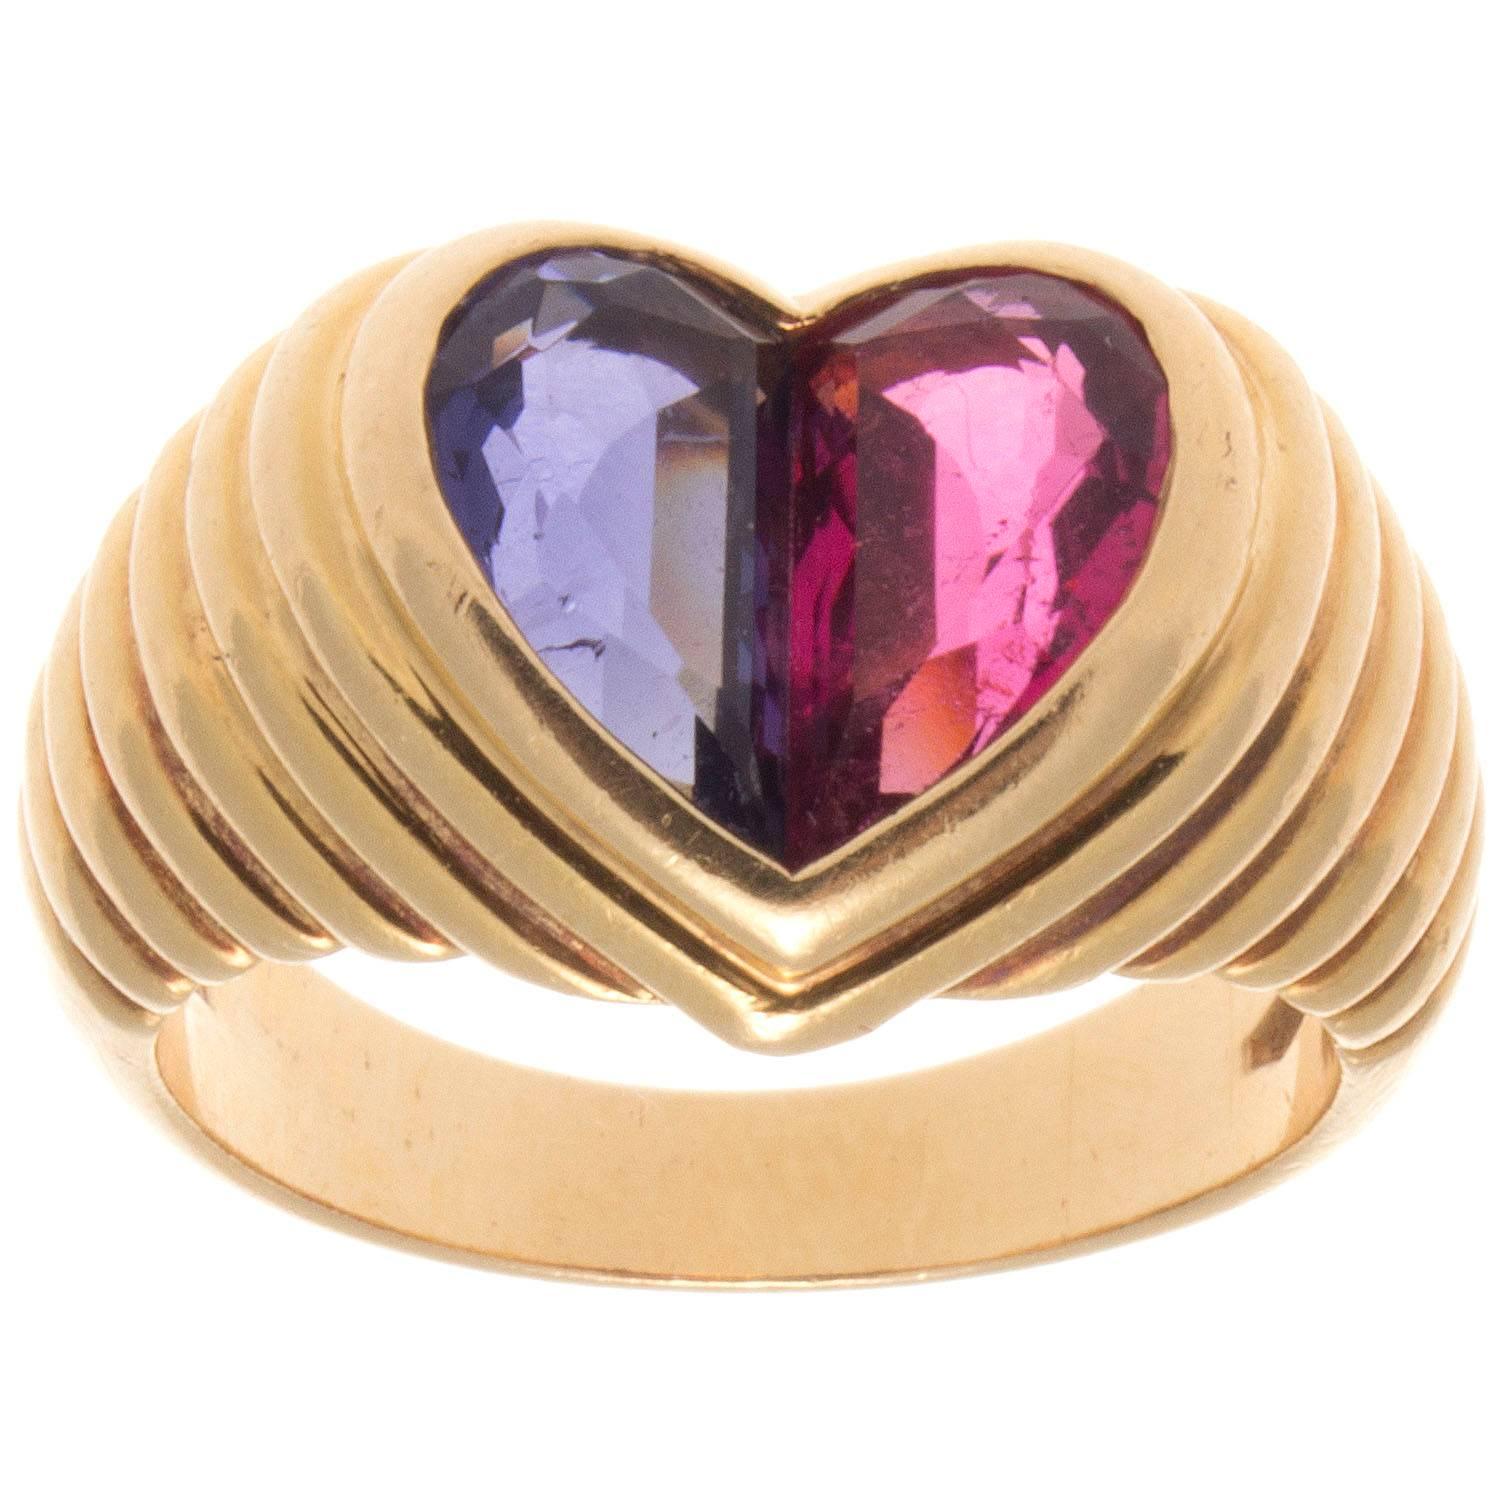 A striking color display from Bulgari. Opposites attract in this joining of a vibrant pink tourmaline and vivid purple amethyst set amid rolling contours of 18k gold. Signed Bulgari.

Ring size 5 3/4 and may be resized to fit.